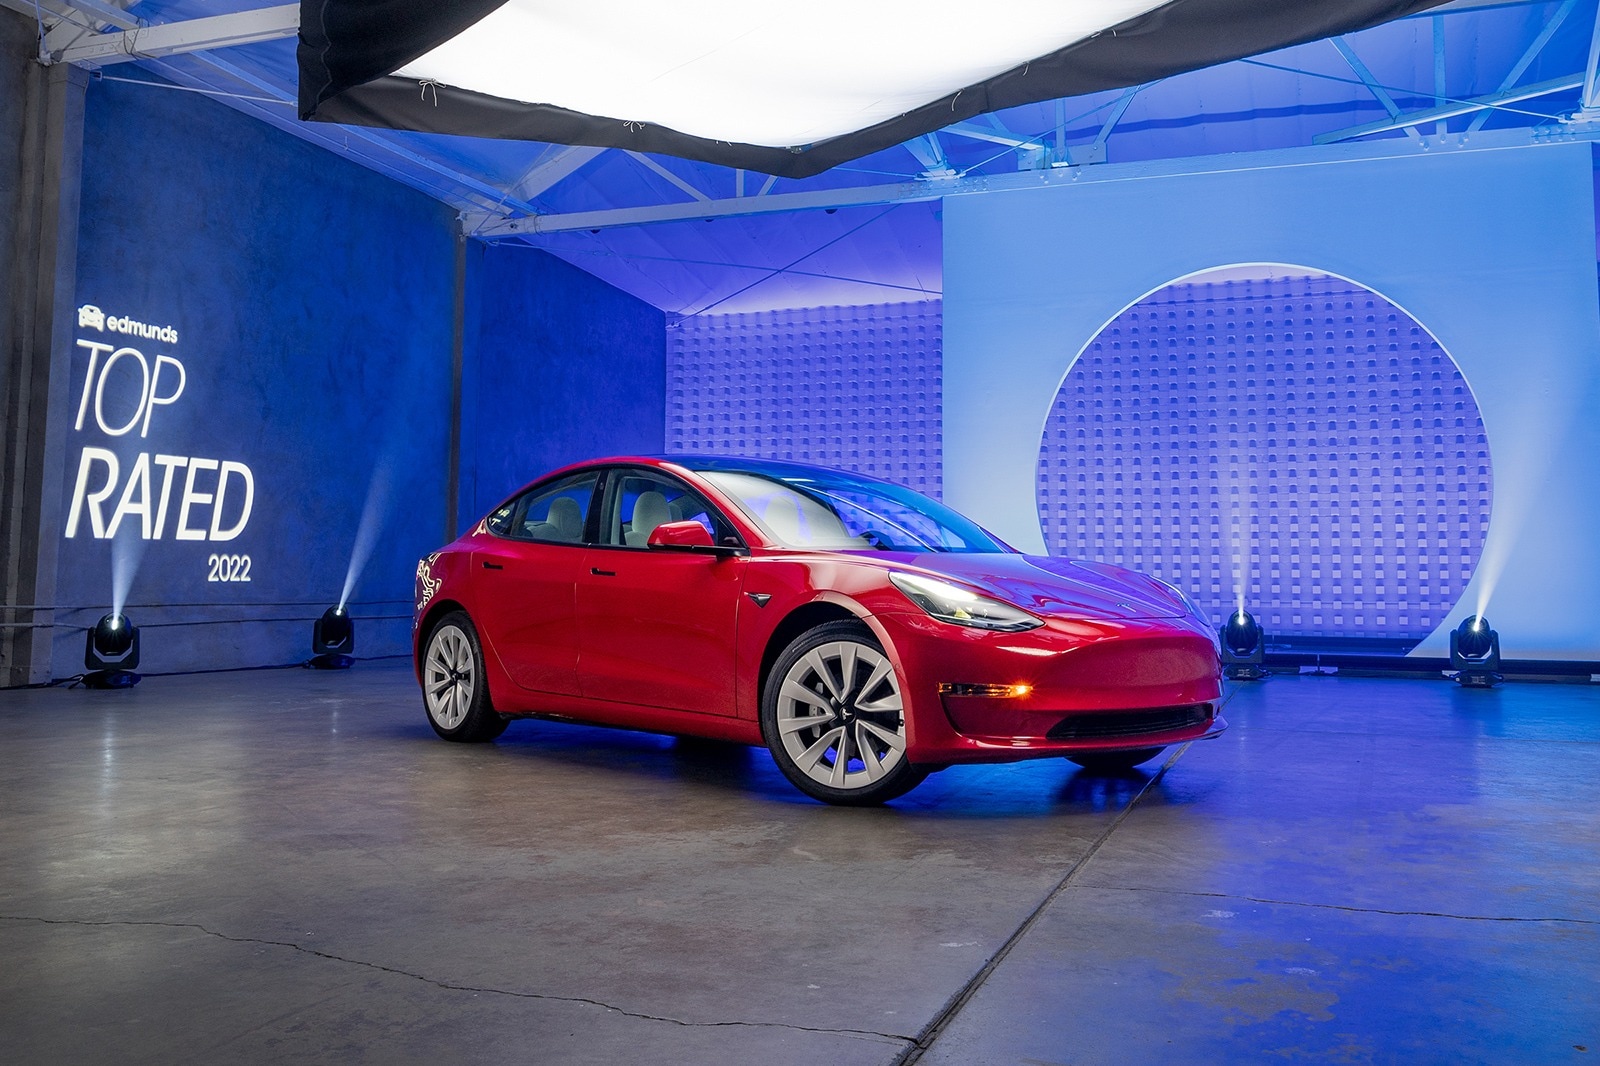 Tesla Model 3 Breaks Through the Noise as the Edmunds Top Rated EV for 2022 